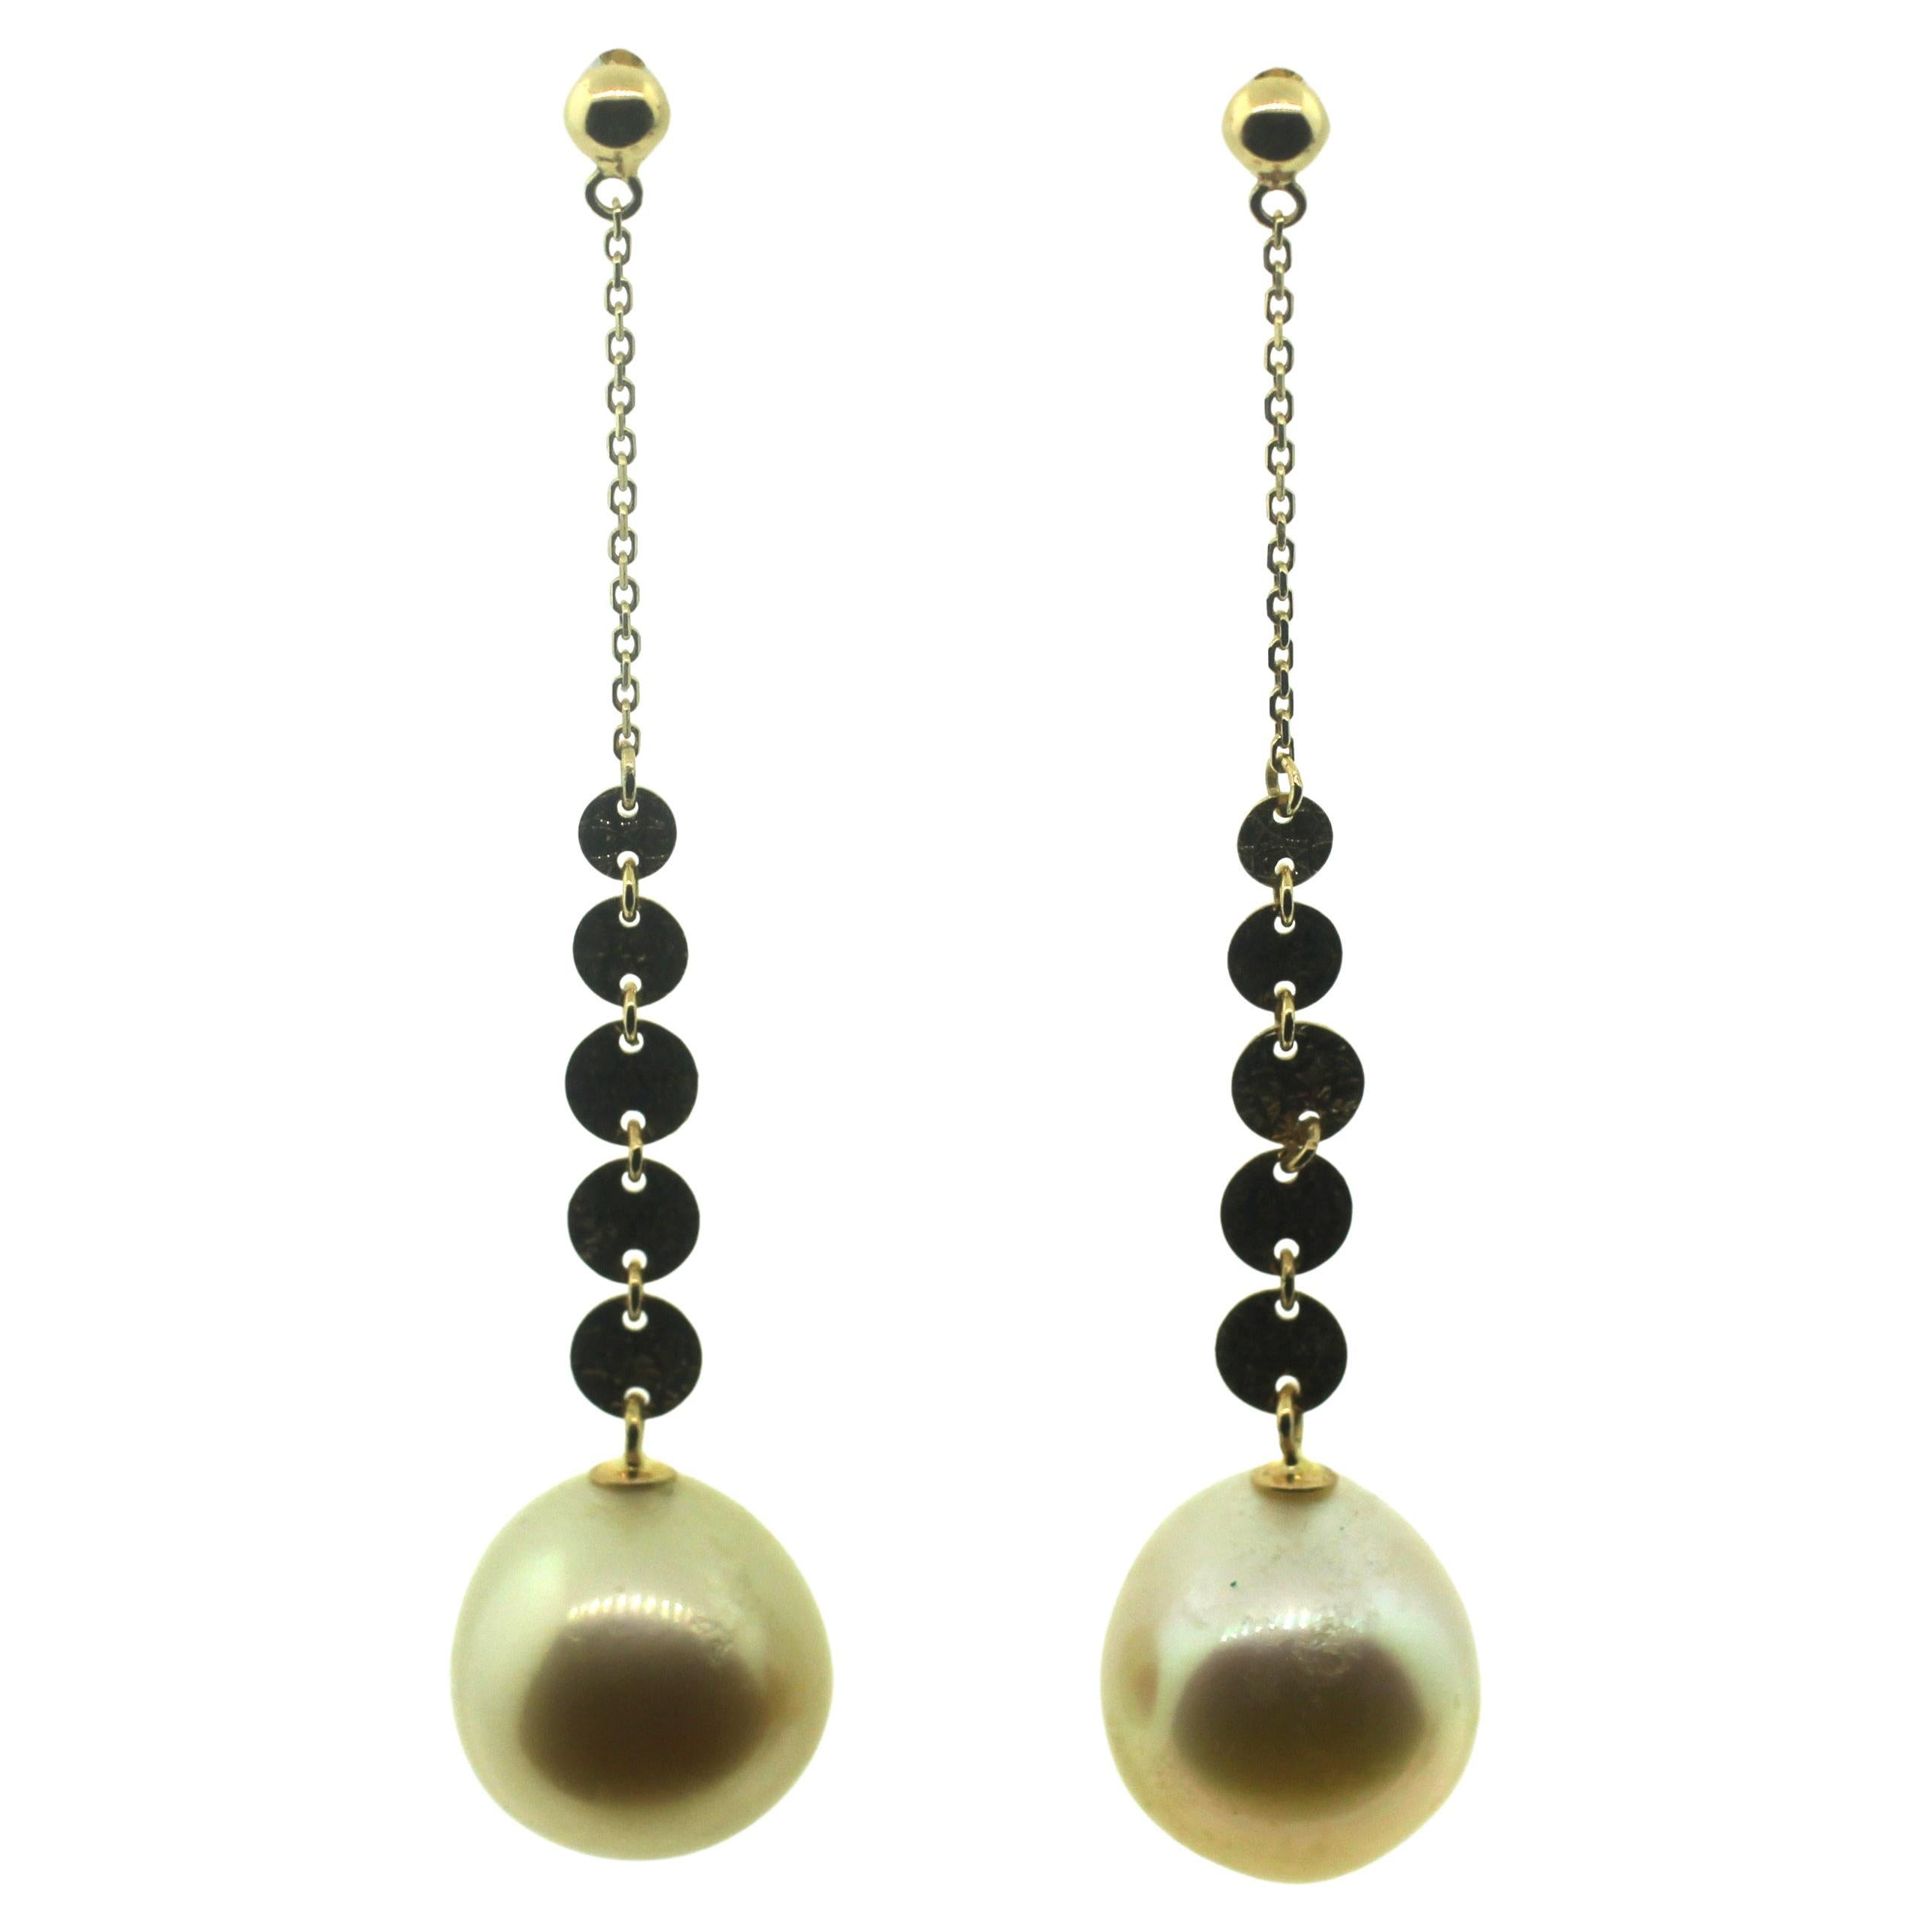 Hakimoto By Jewel Of Ocean
18K Yellow Gold 
Natural Color Drop Cultured Pearl Earrings.
Total item weight 5.2 grams
11 mm Natural color South Sea Cultured Pearl
Orient: Very Good
Luster: Very Good
Nacre: Very Good